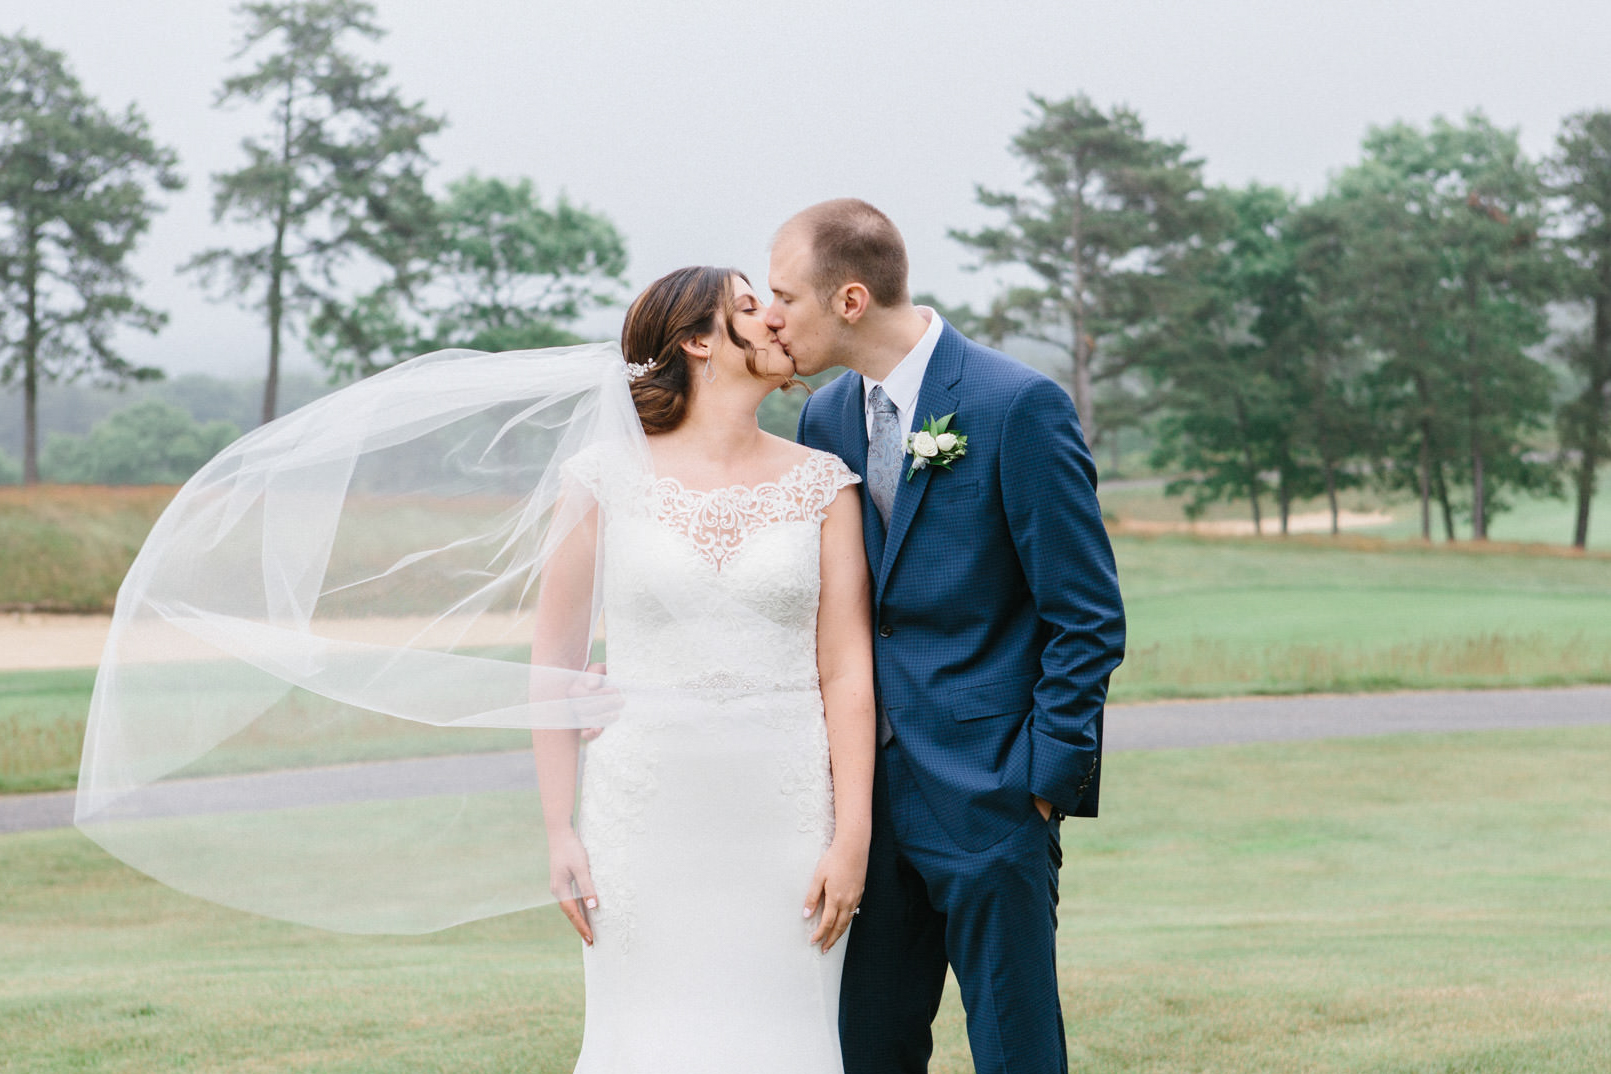 Couple kissing during their wedding at the Waverly Oaks Golf Club in Plymouth, MA